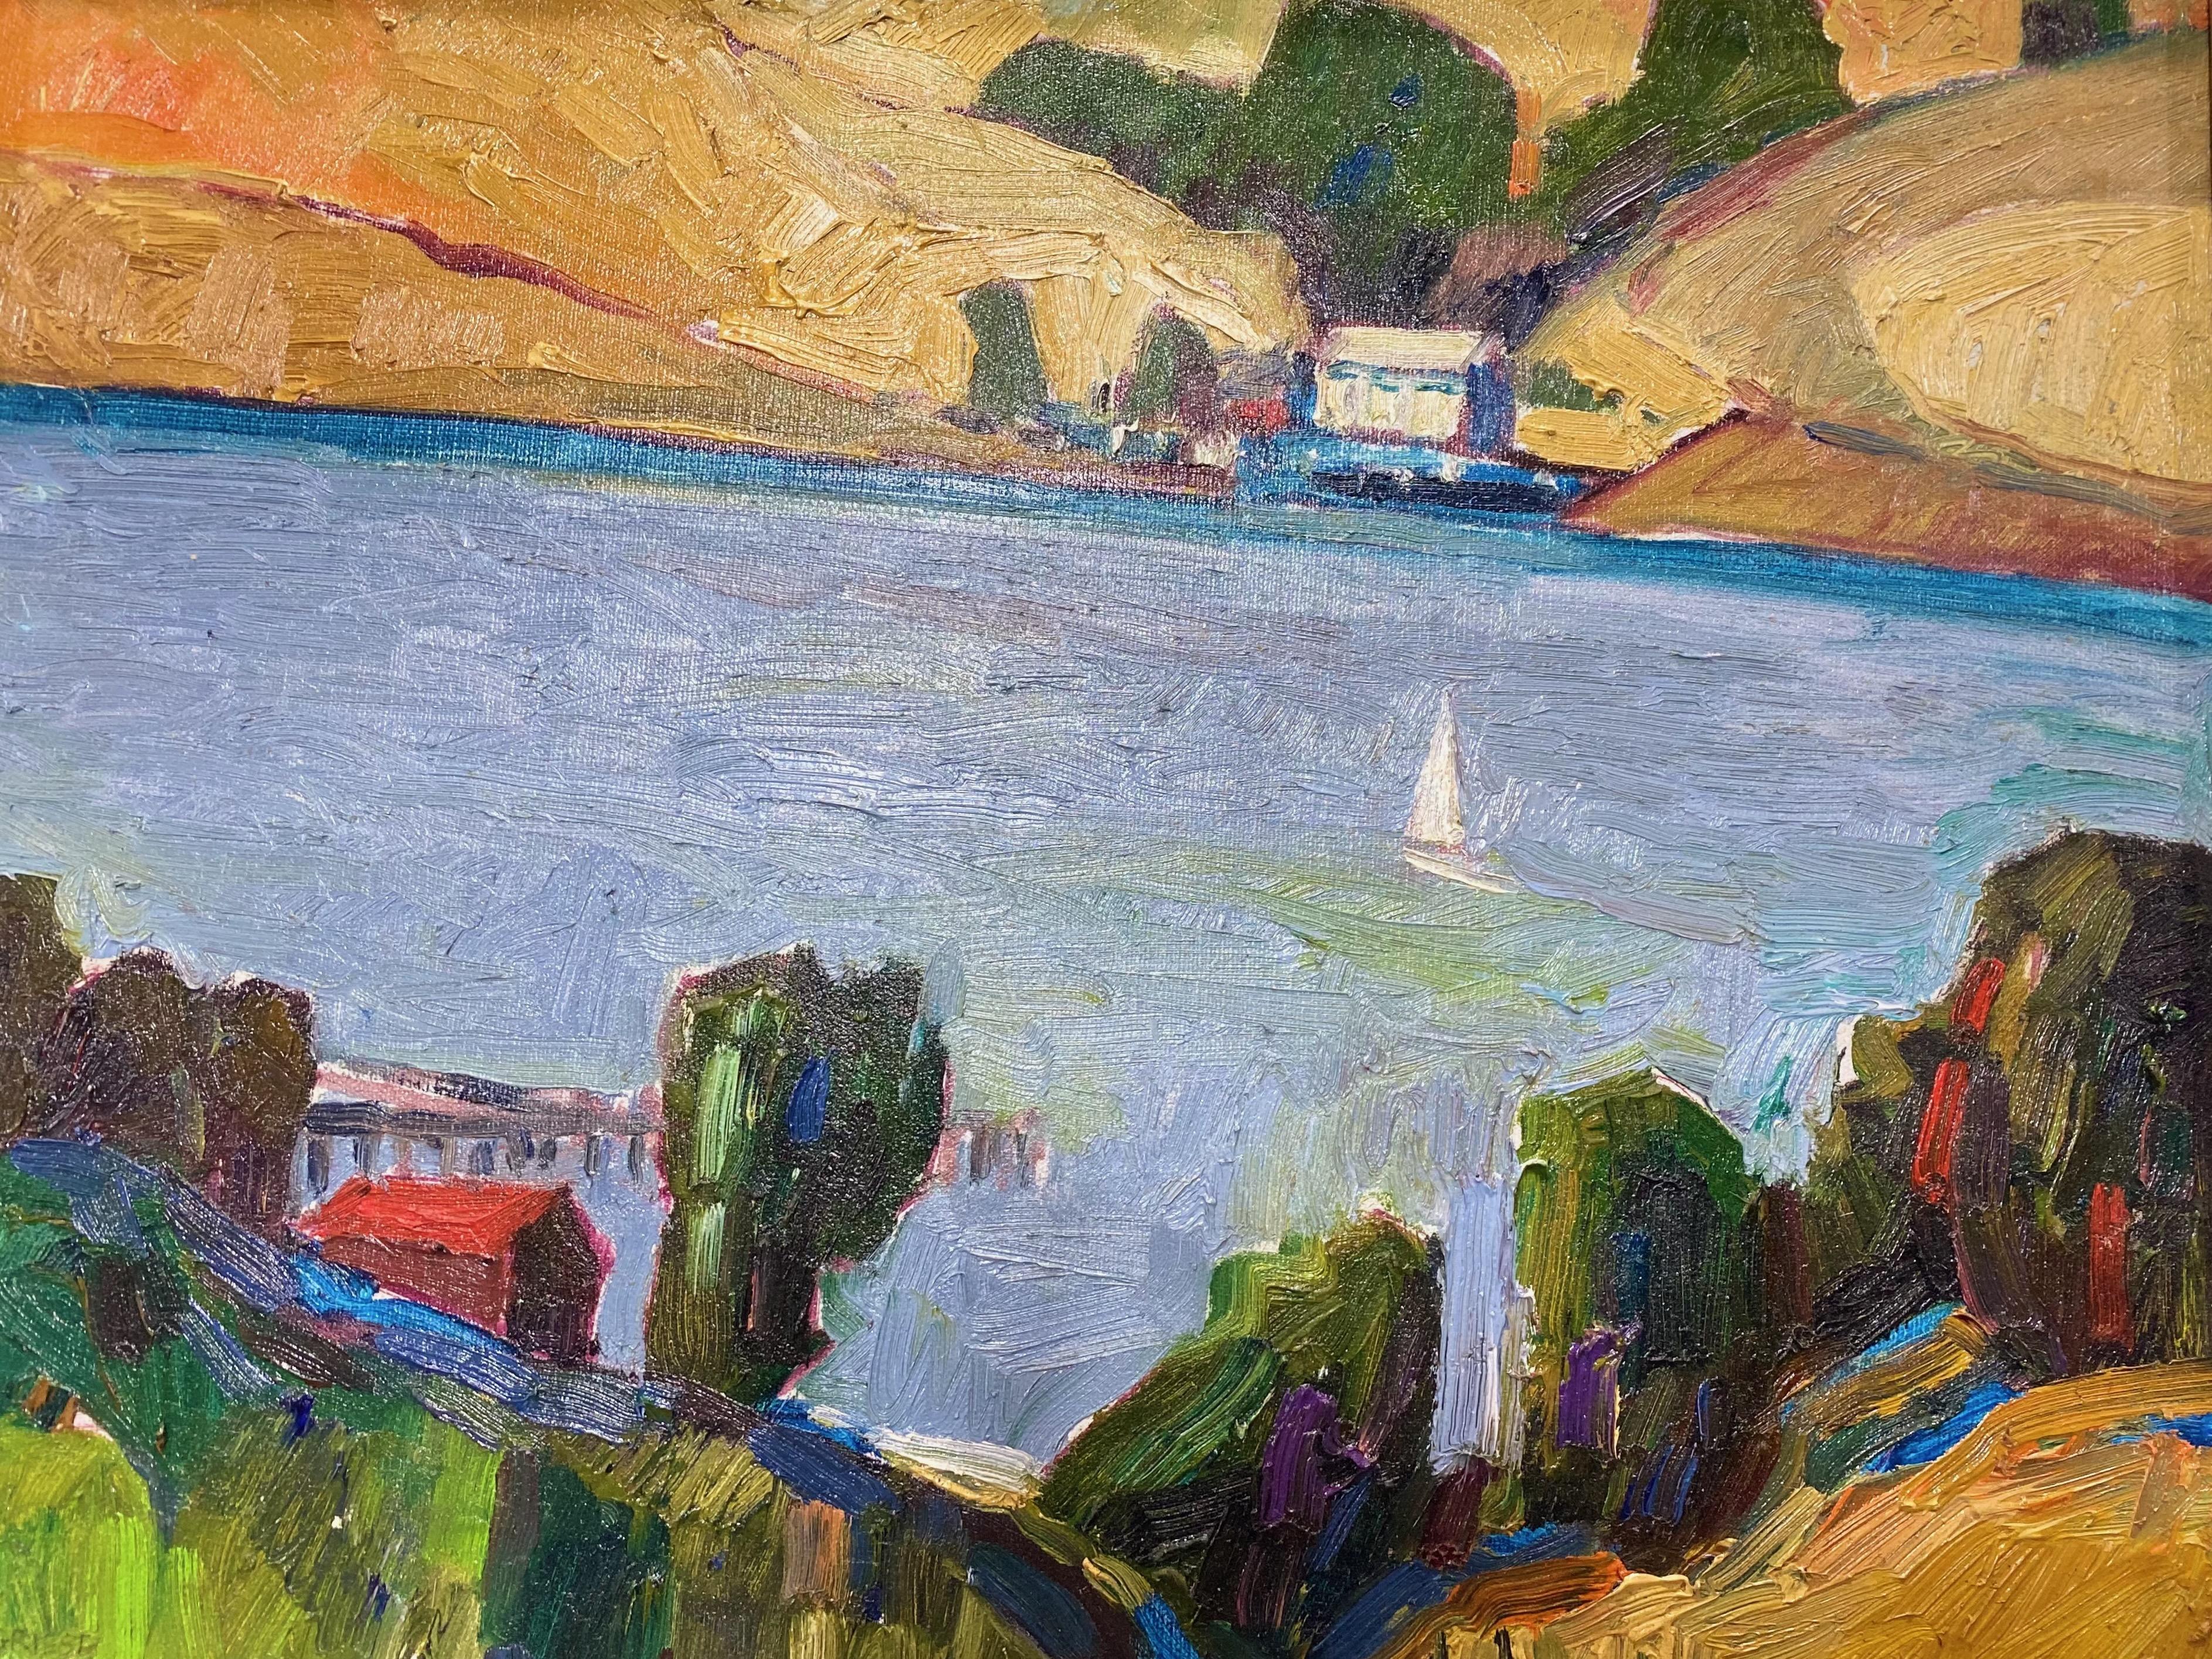 American San Francisco Bay Area Coastal Landscape Painting by Lundy Siegriest, 1977